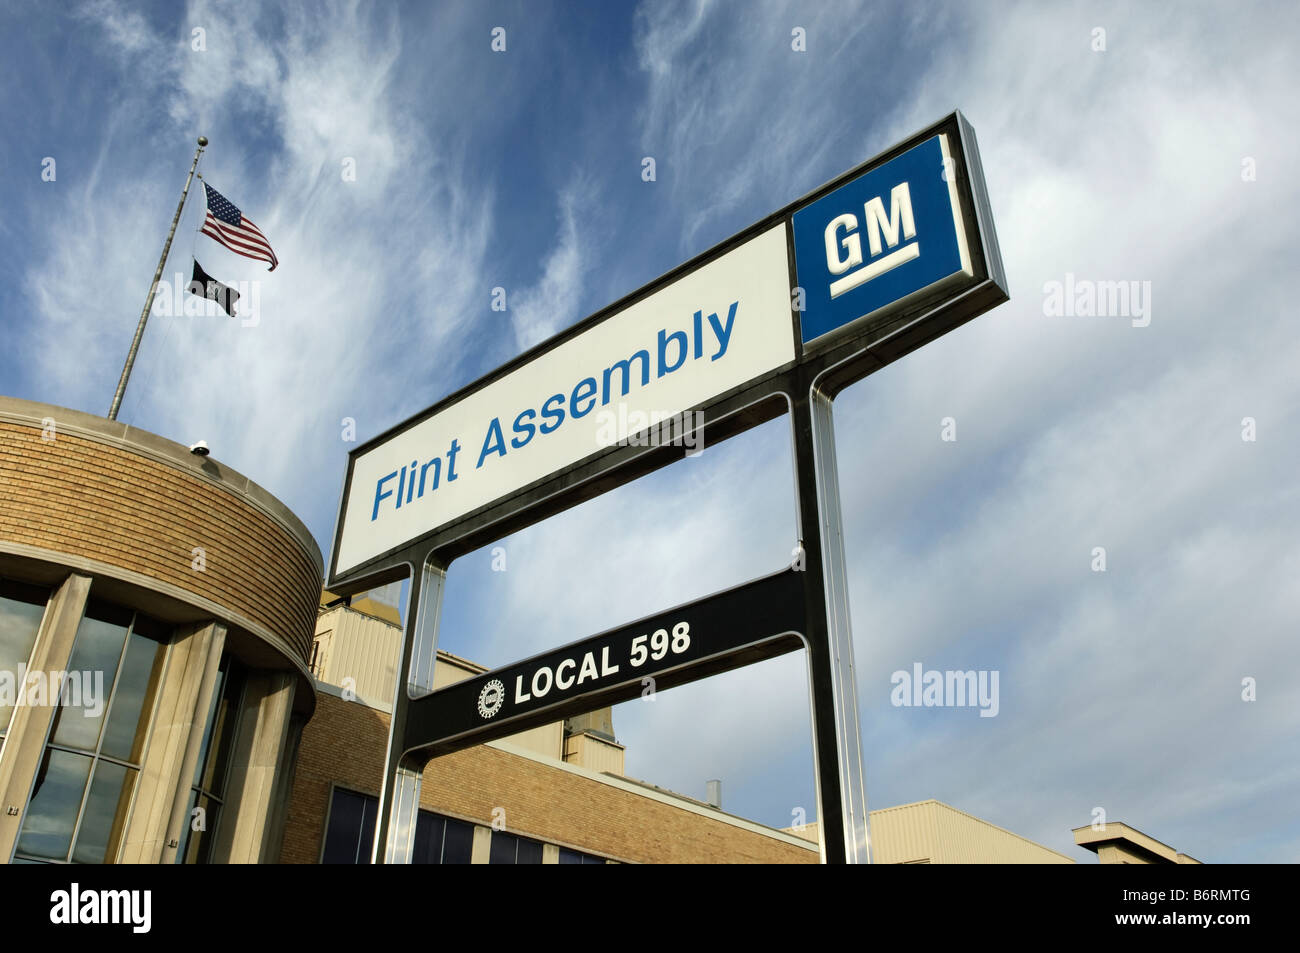 General Motors Flint Assembly factory building and sign in Flint Michigan USA. Stock Photo